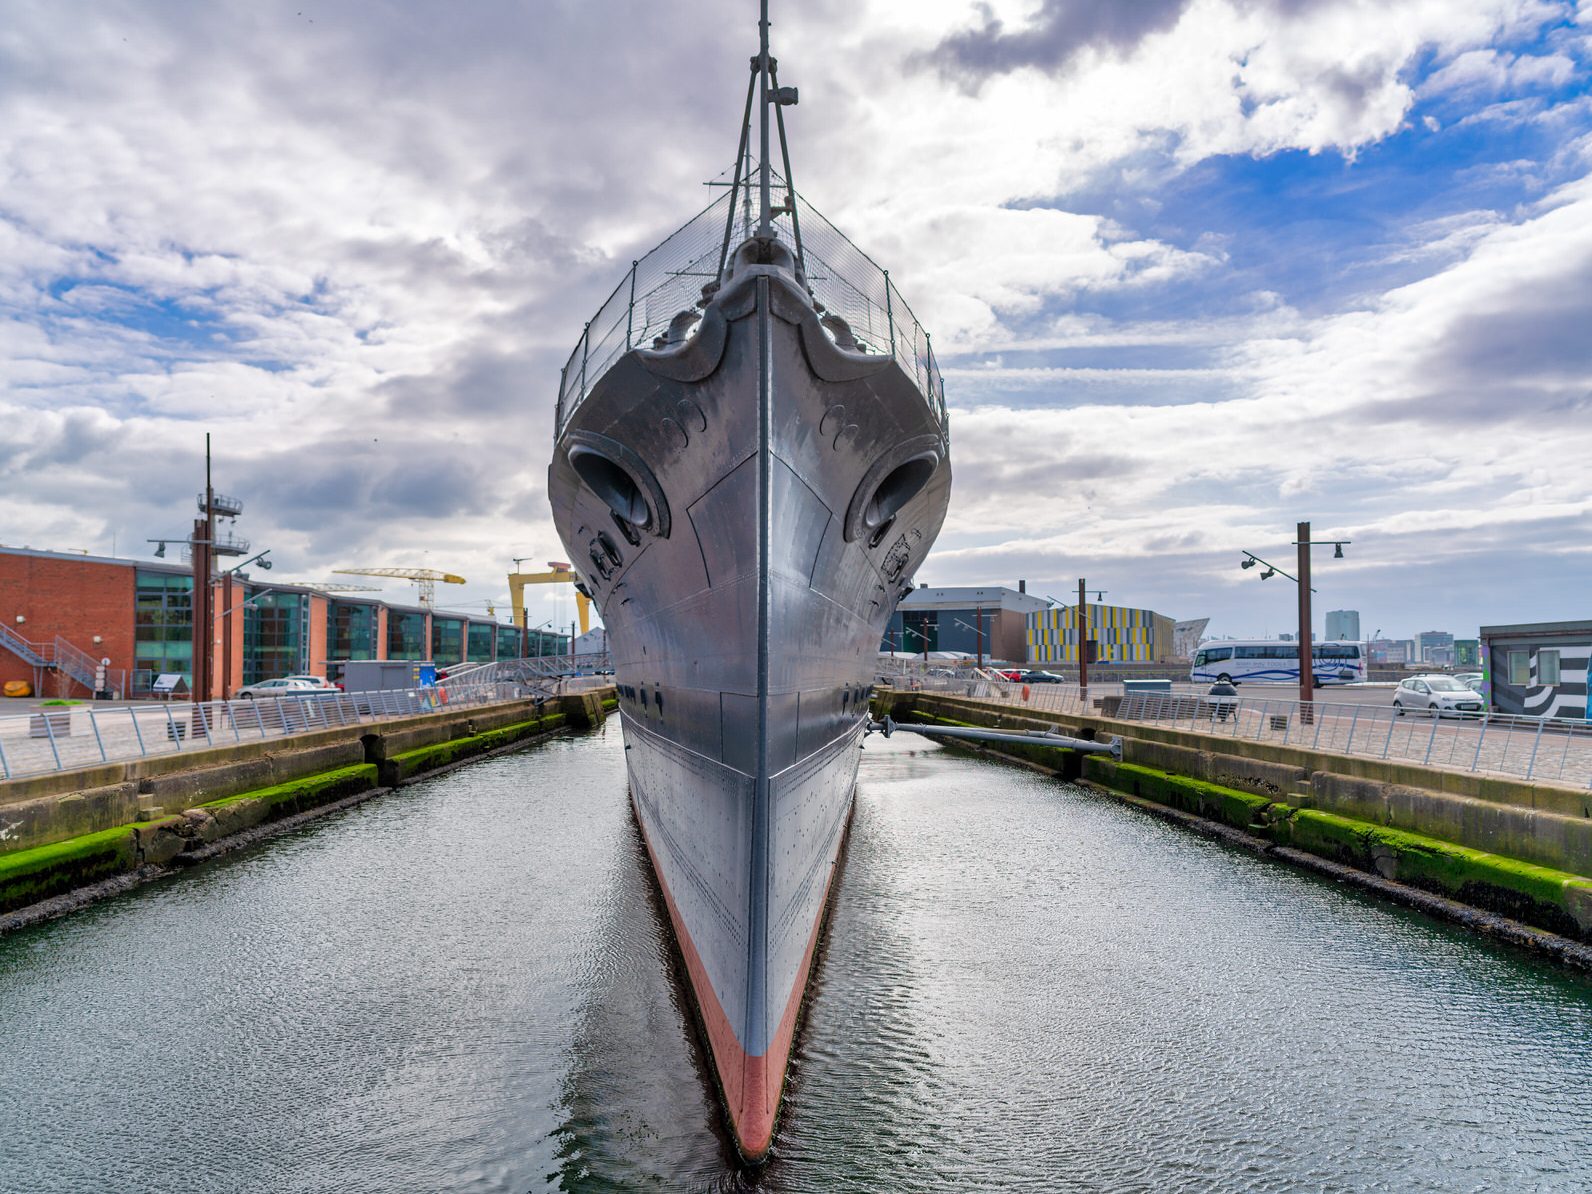 HMS CAROLINE IS AN ATTRACTIVE SHIP [NOW A MUSEUM SHIP AT ALEXANDRA DOCK IN BELFAST]-224596-1